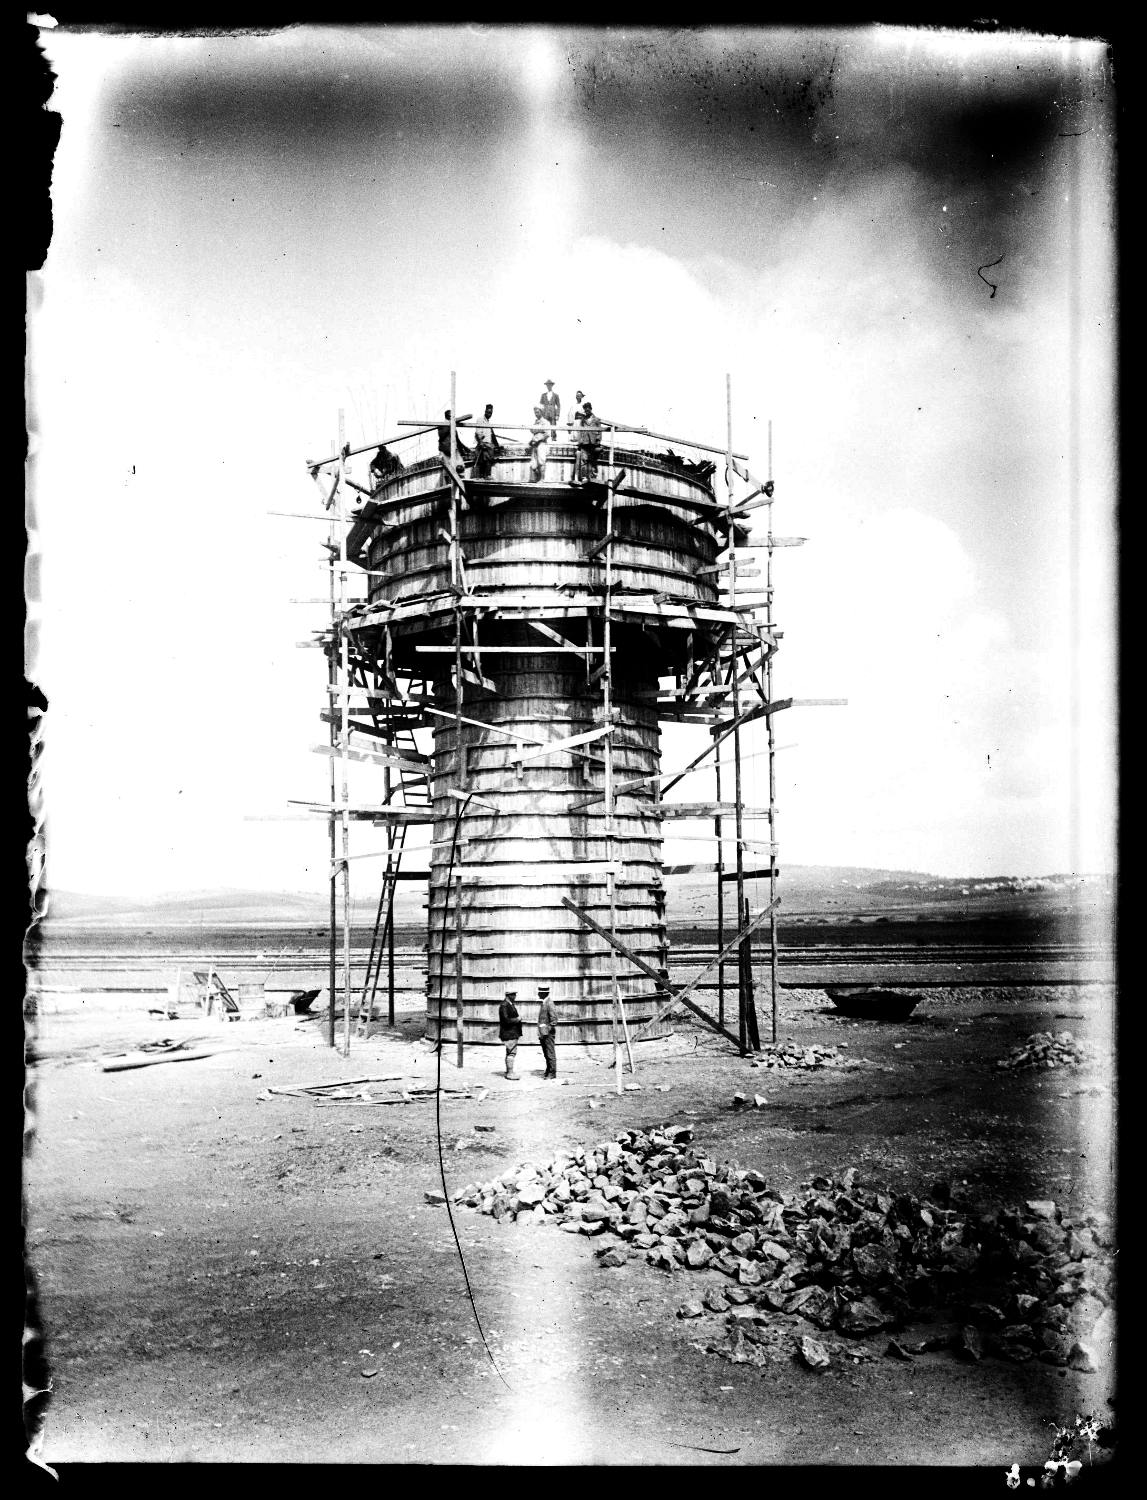 Close-up view, construction of water tower with workers on site